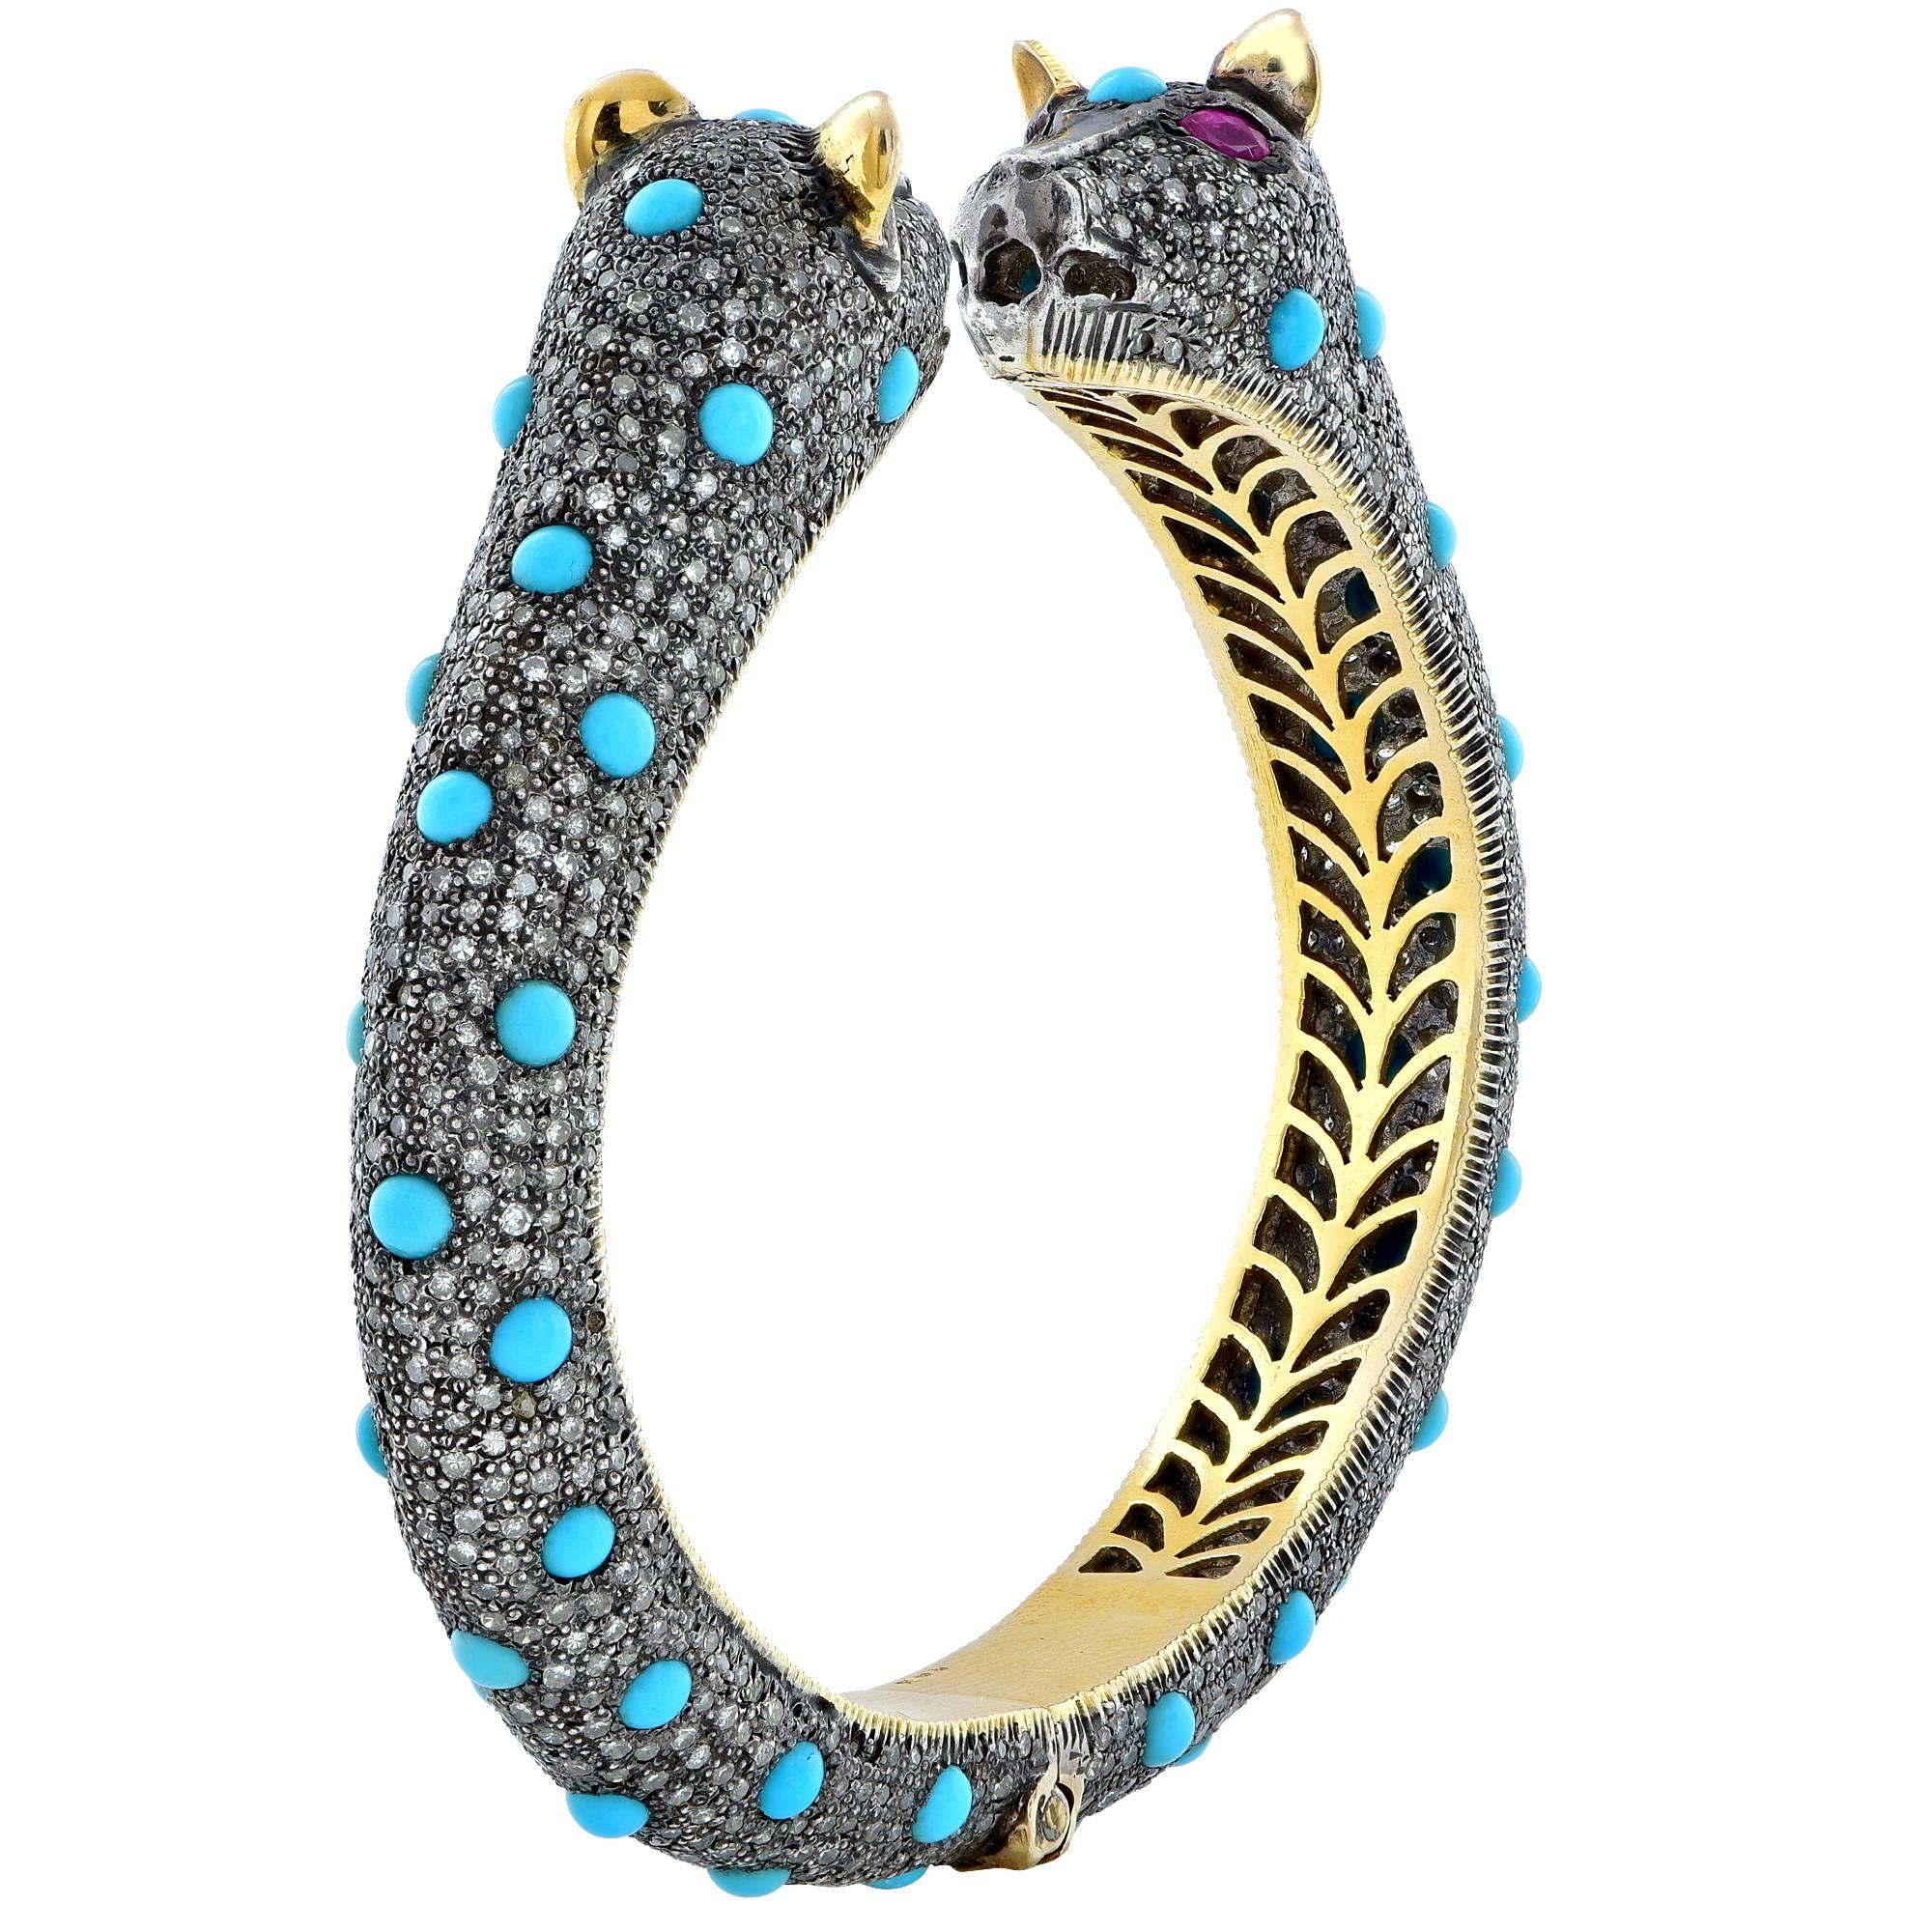 Silver and 14k yellow gold double headed lion bangle featuring diamonds and turquoise.

The bracelet measures 6.25 inches in circumference by .50 inch in width.
It is stamped and/or tested as 18k gold.
The metal weight is 43.85 grams.

This